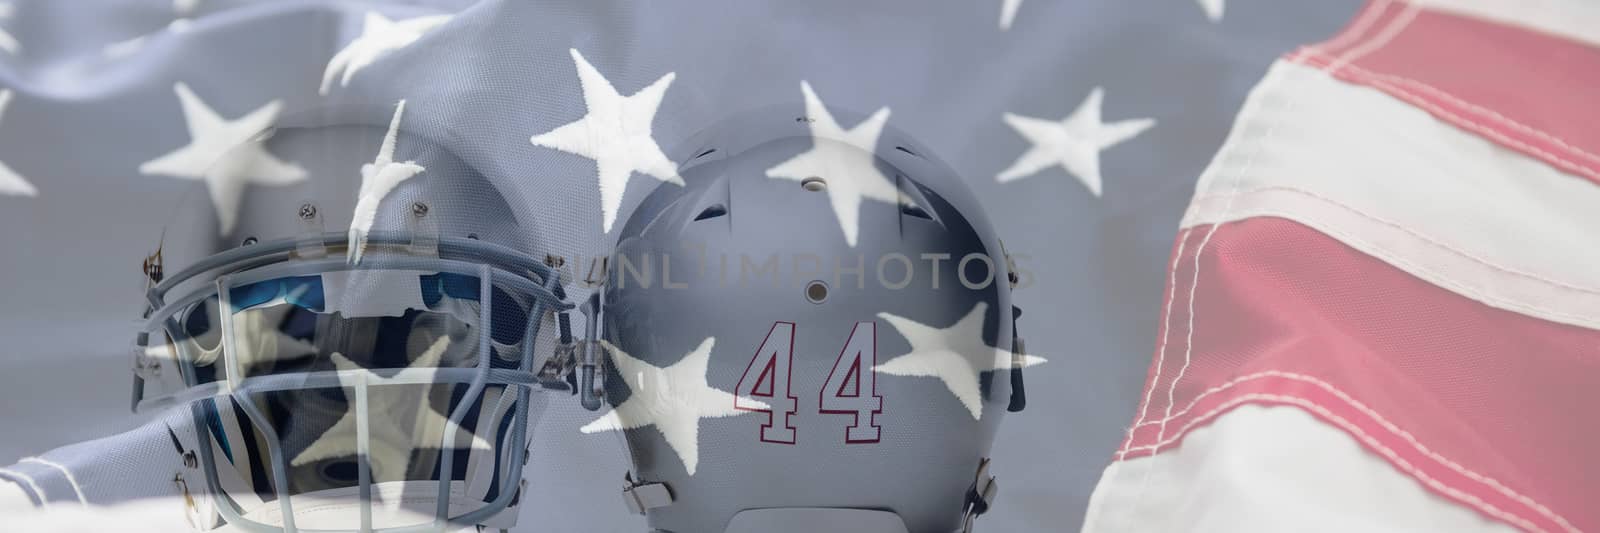 Close up of silver colored sports helmets against full frame of american flag